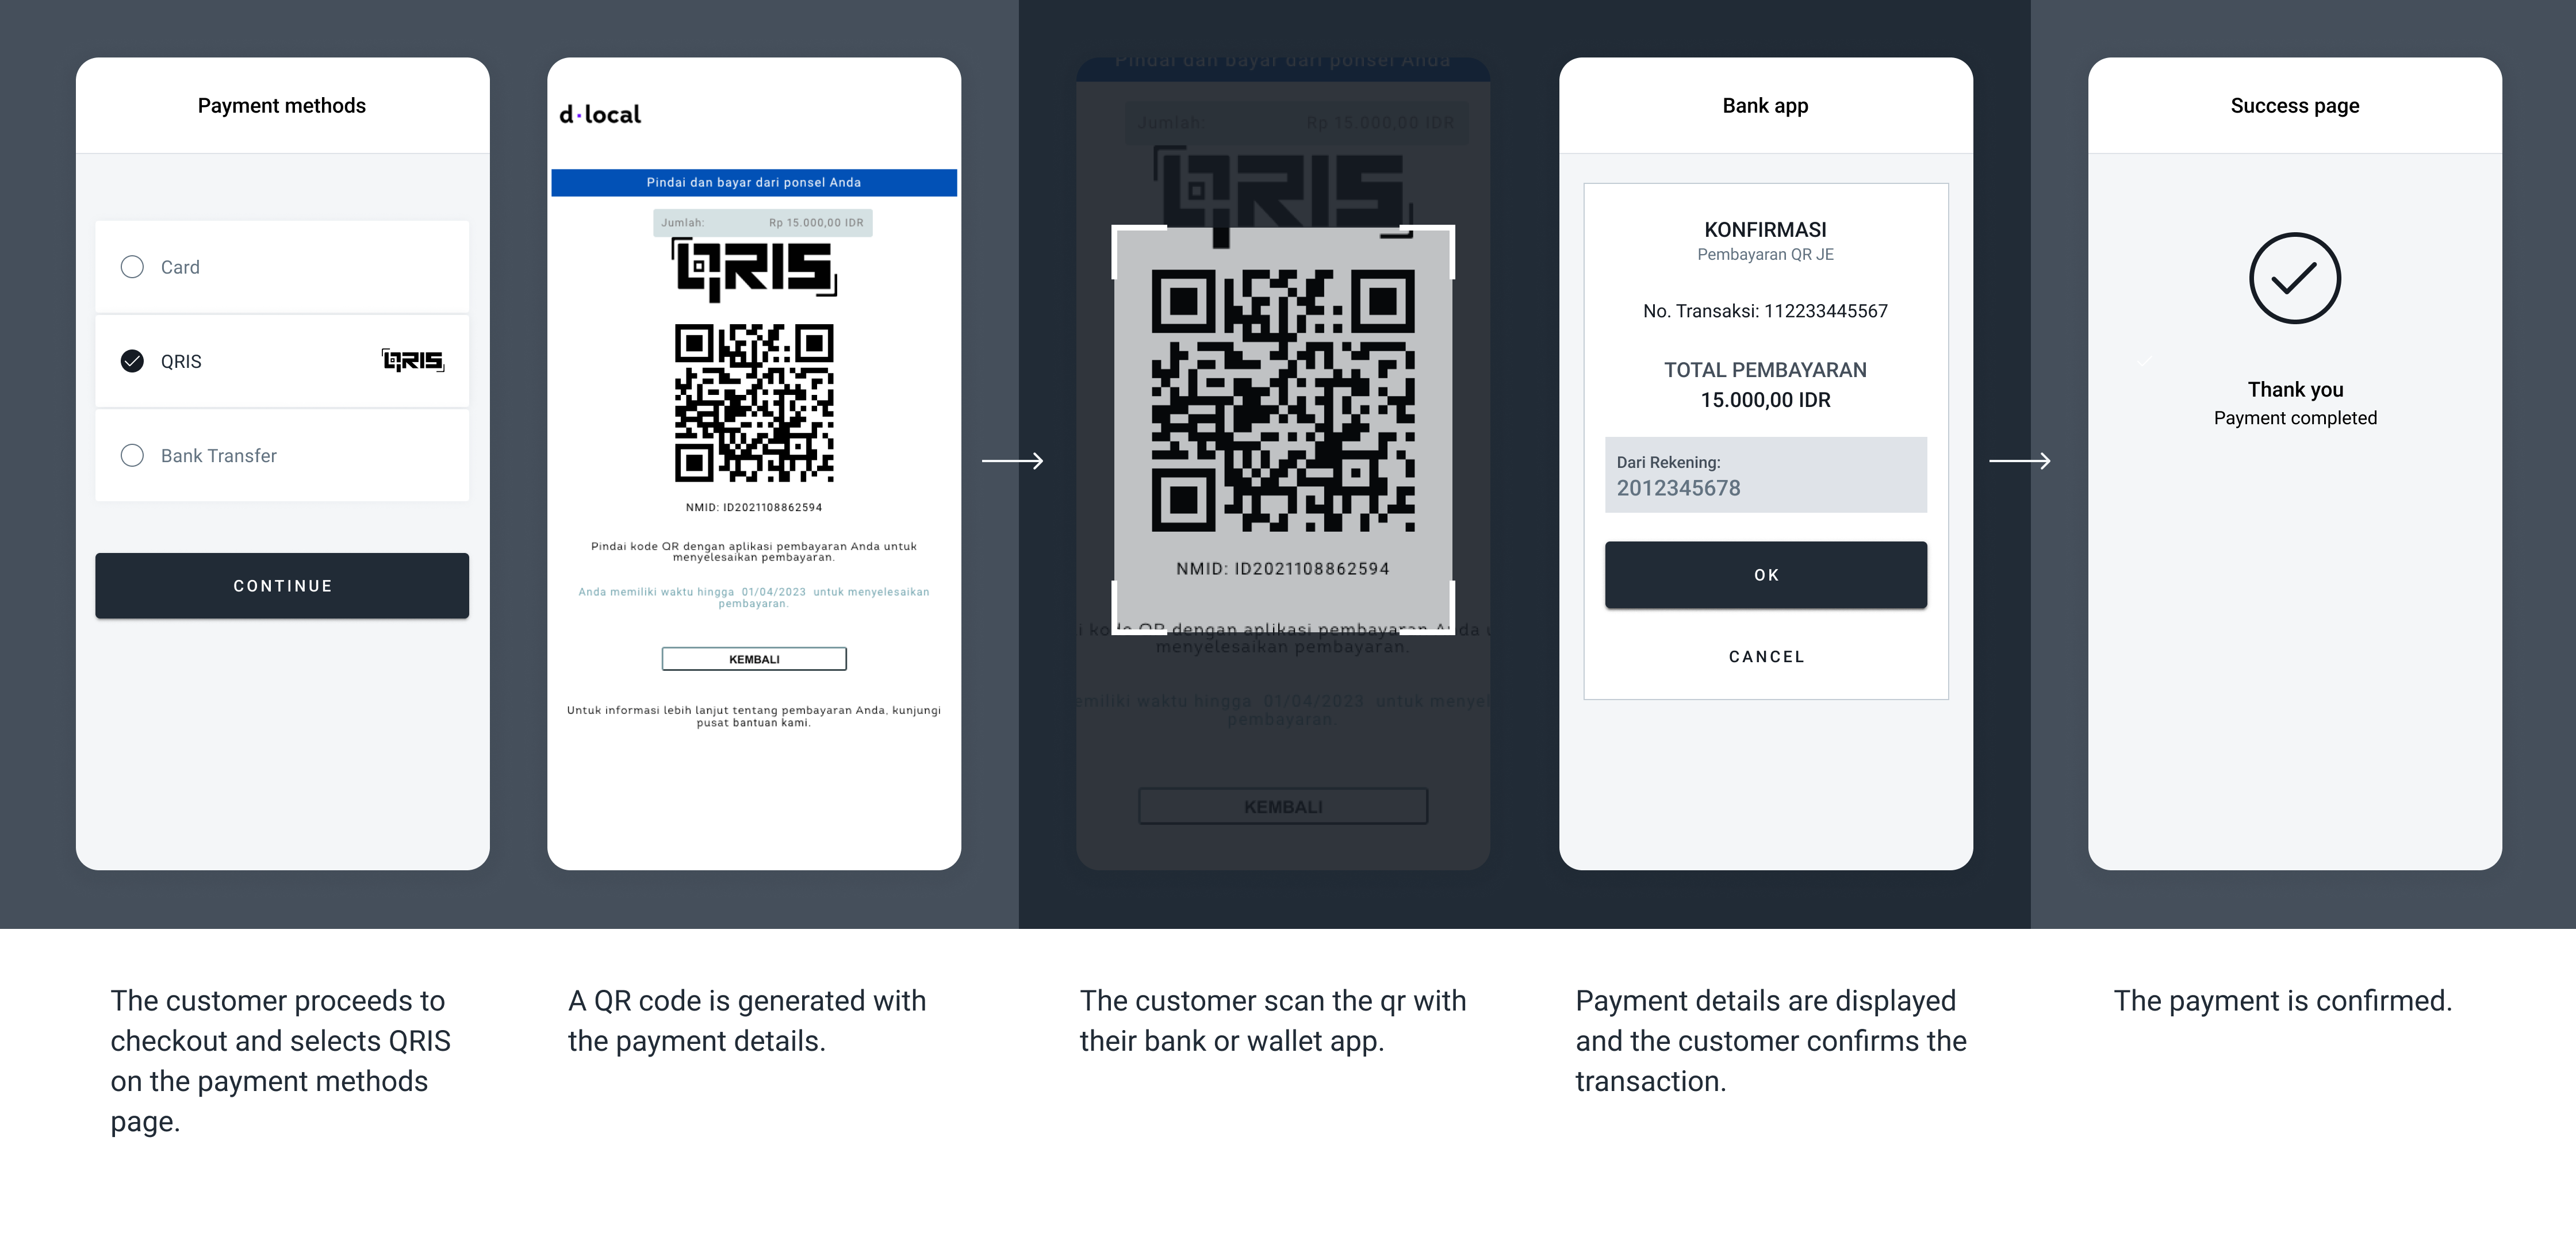 The screenshots illustrate a generic Internet banking redirect flow. The specifics of the flow can change depending on the payment method selected to complete the transaction.